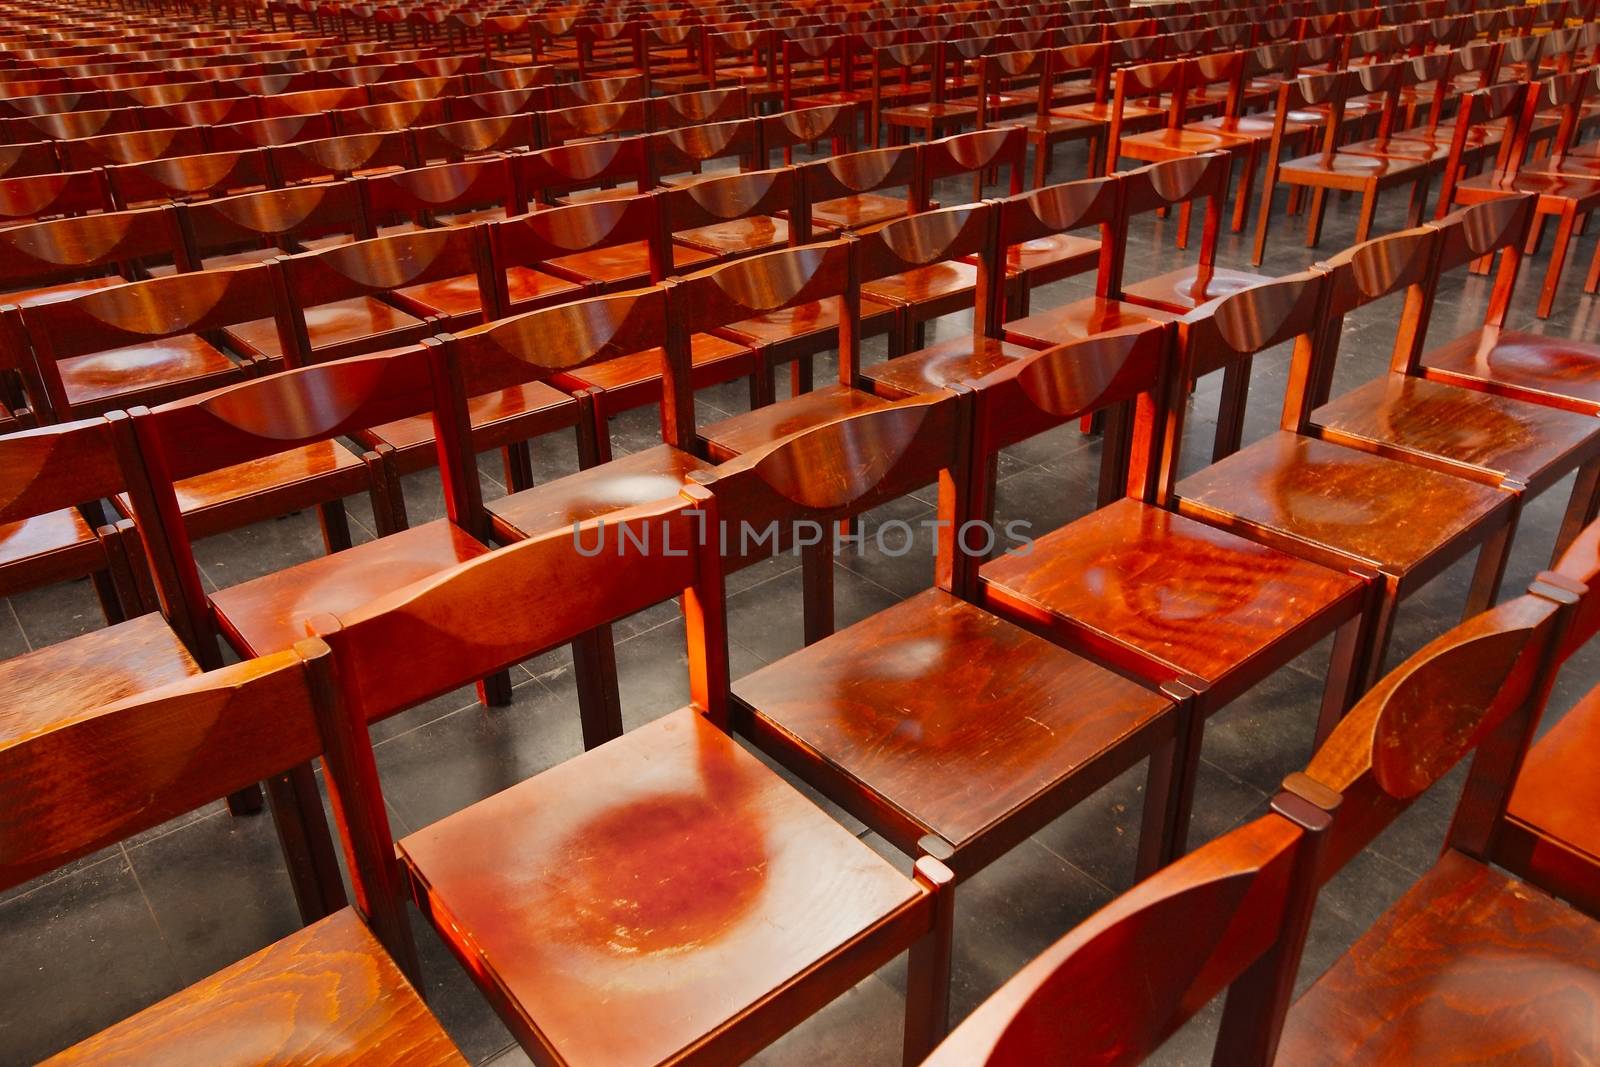 Chairs in rows in a room